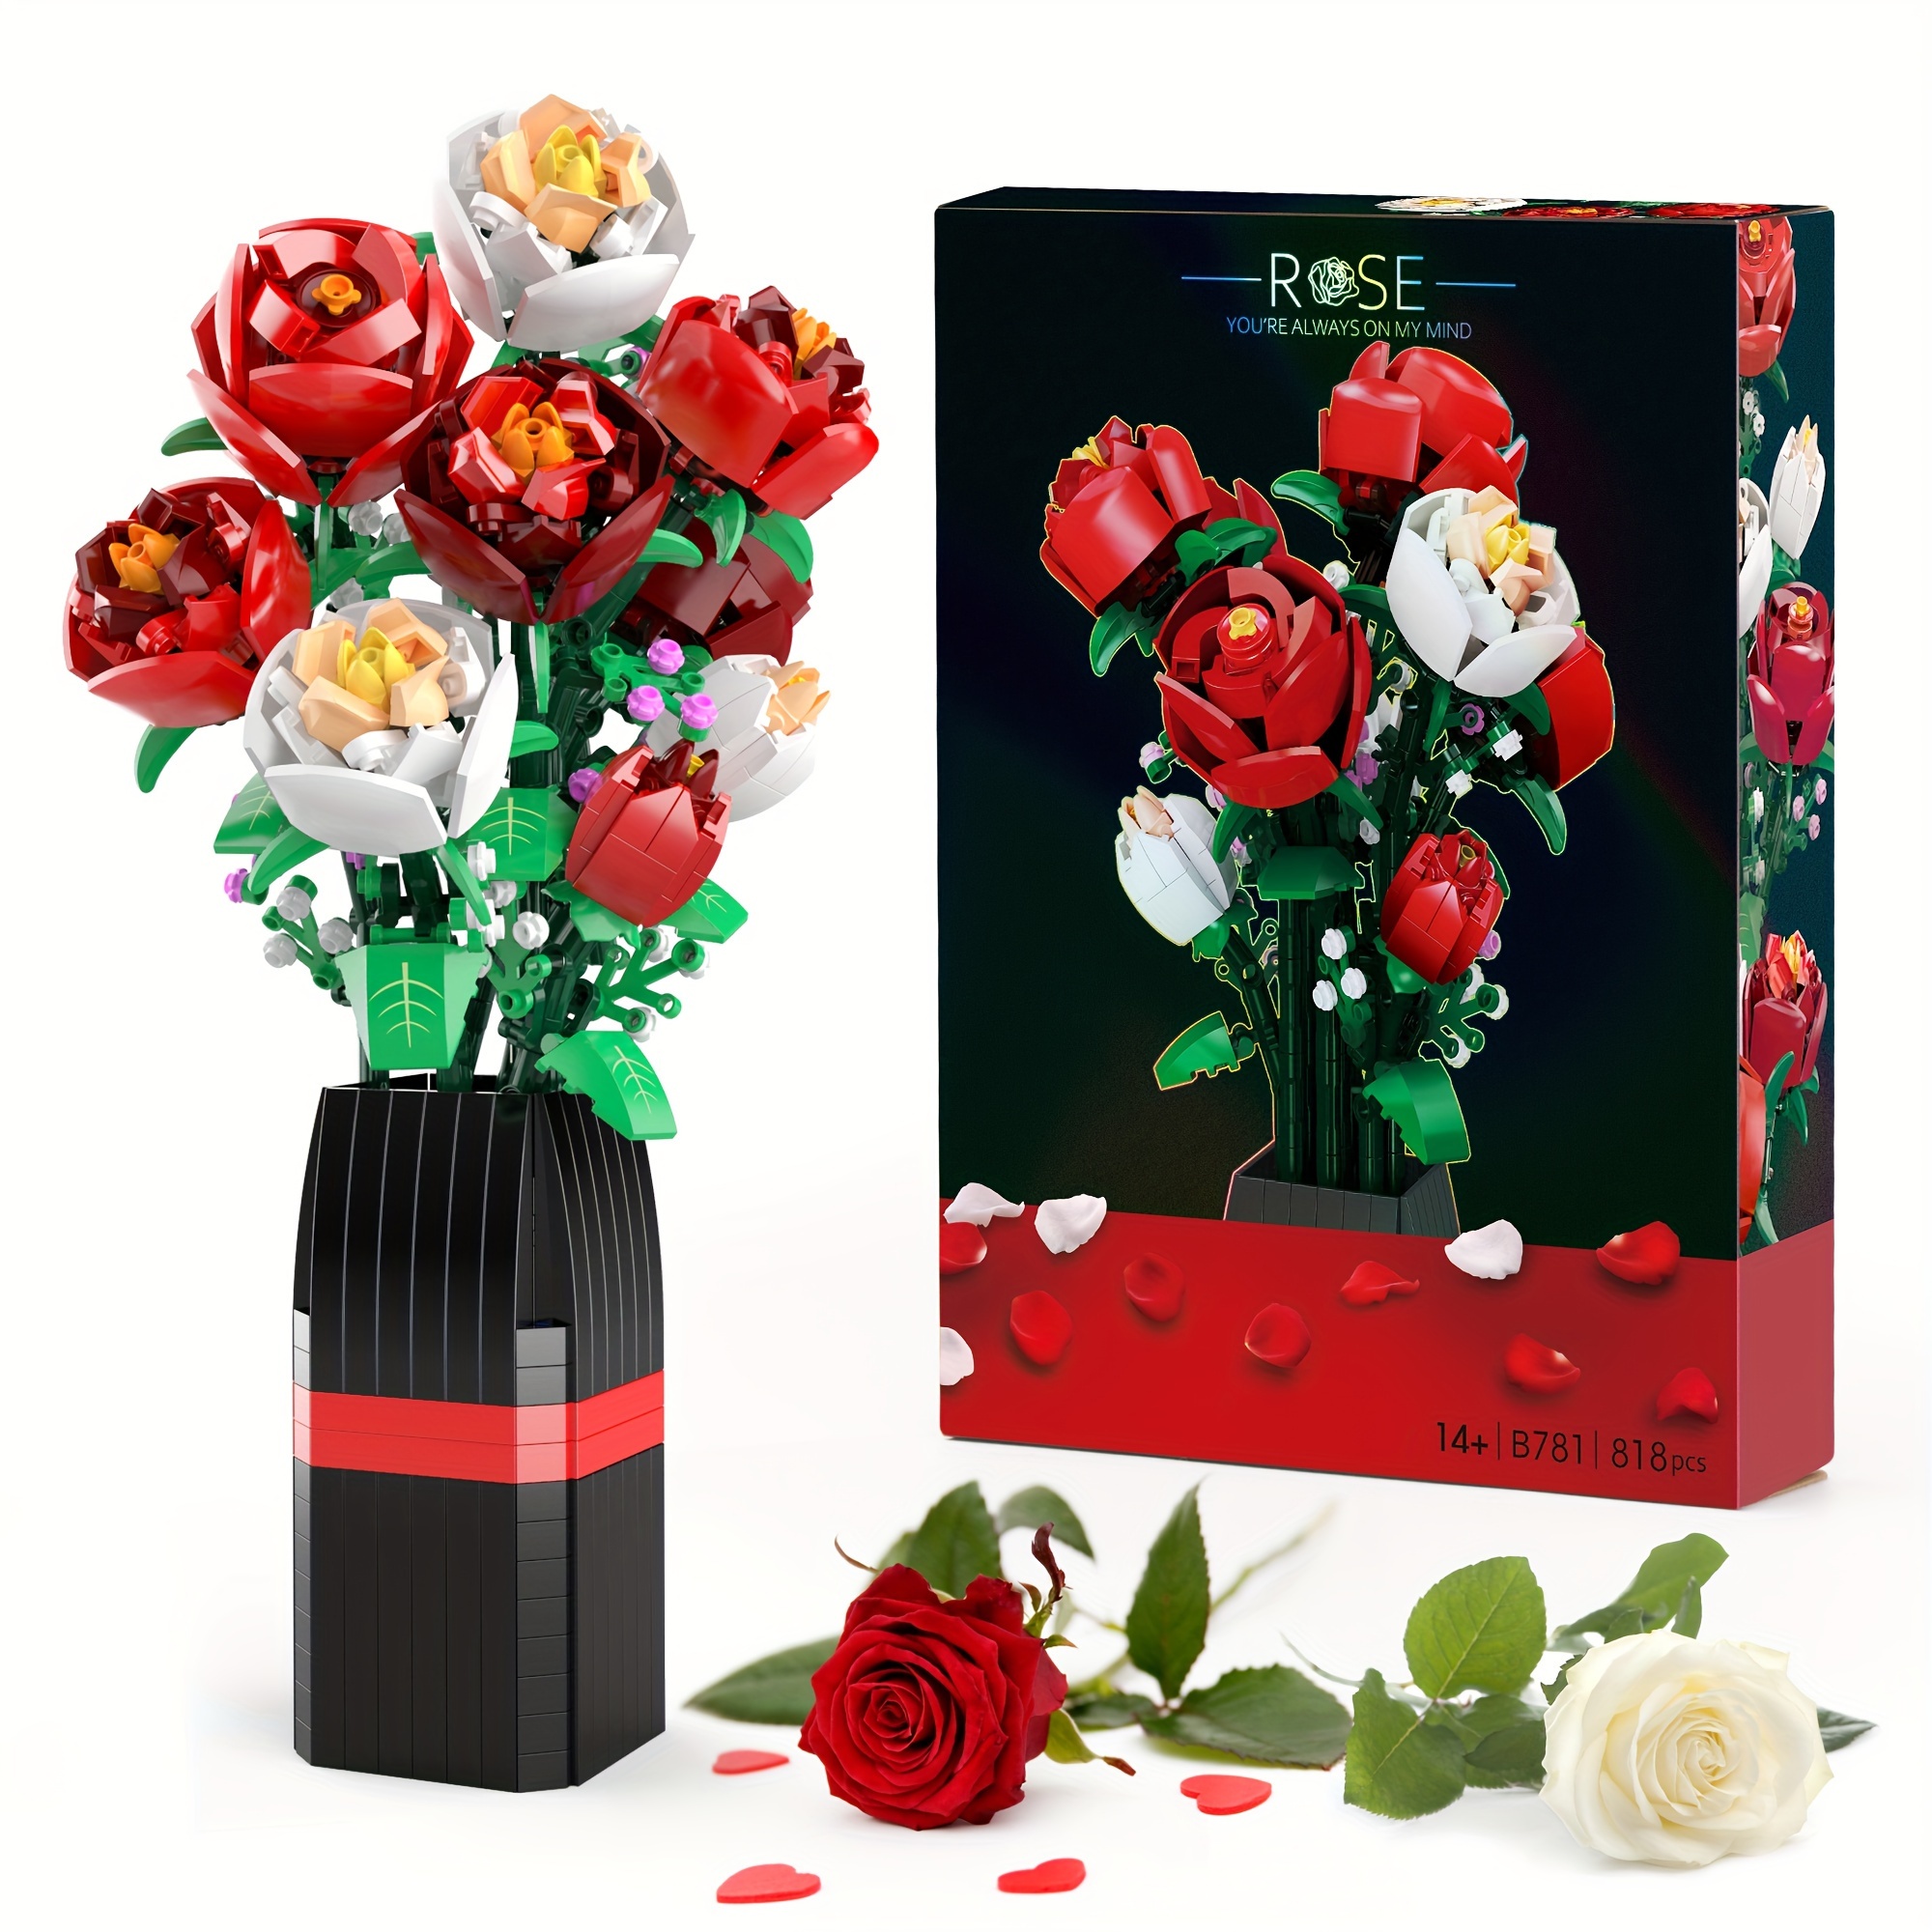 

Flowers Bouquet Building Set (818 Pcs) - Christmas, Mother's Day, Or Valentine's Gifts Ideal For Kids, Women, Girls And Boys, Roses Toy Building Set With Vase